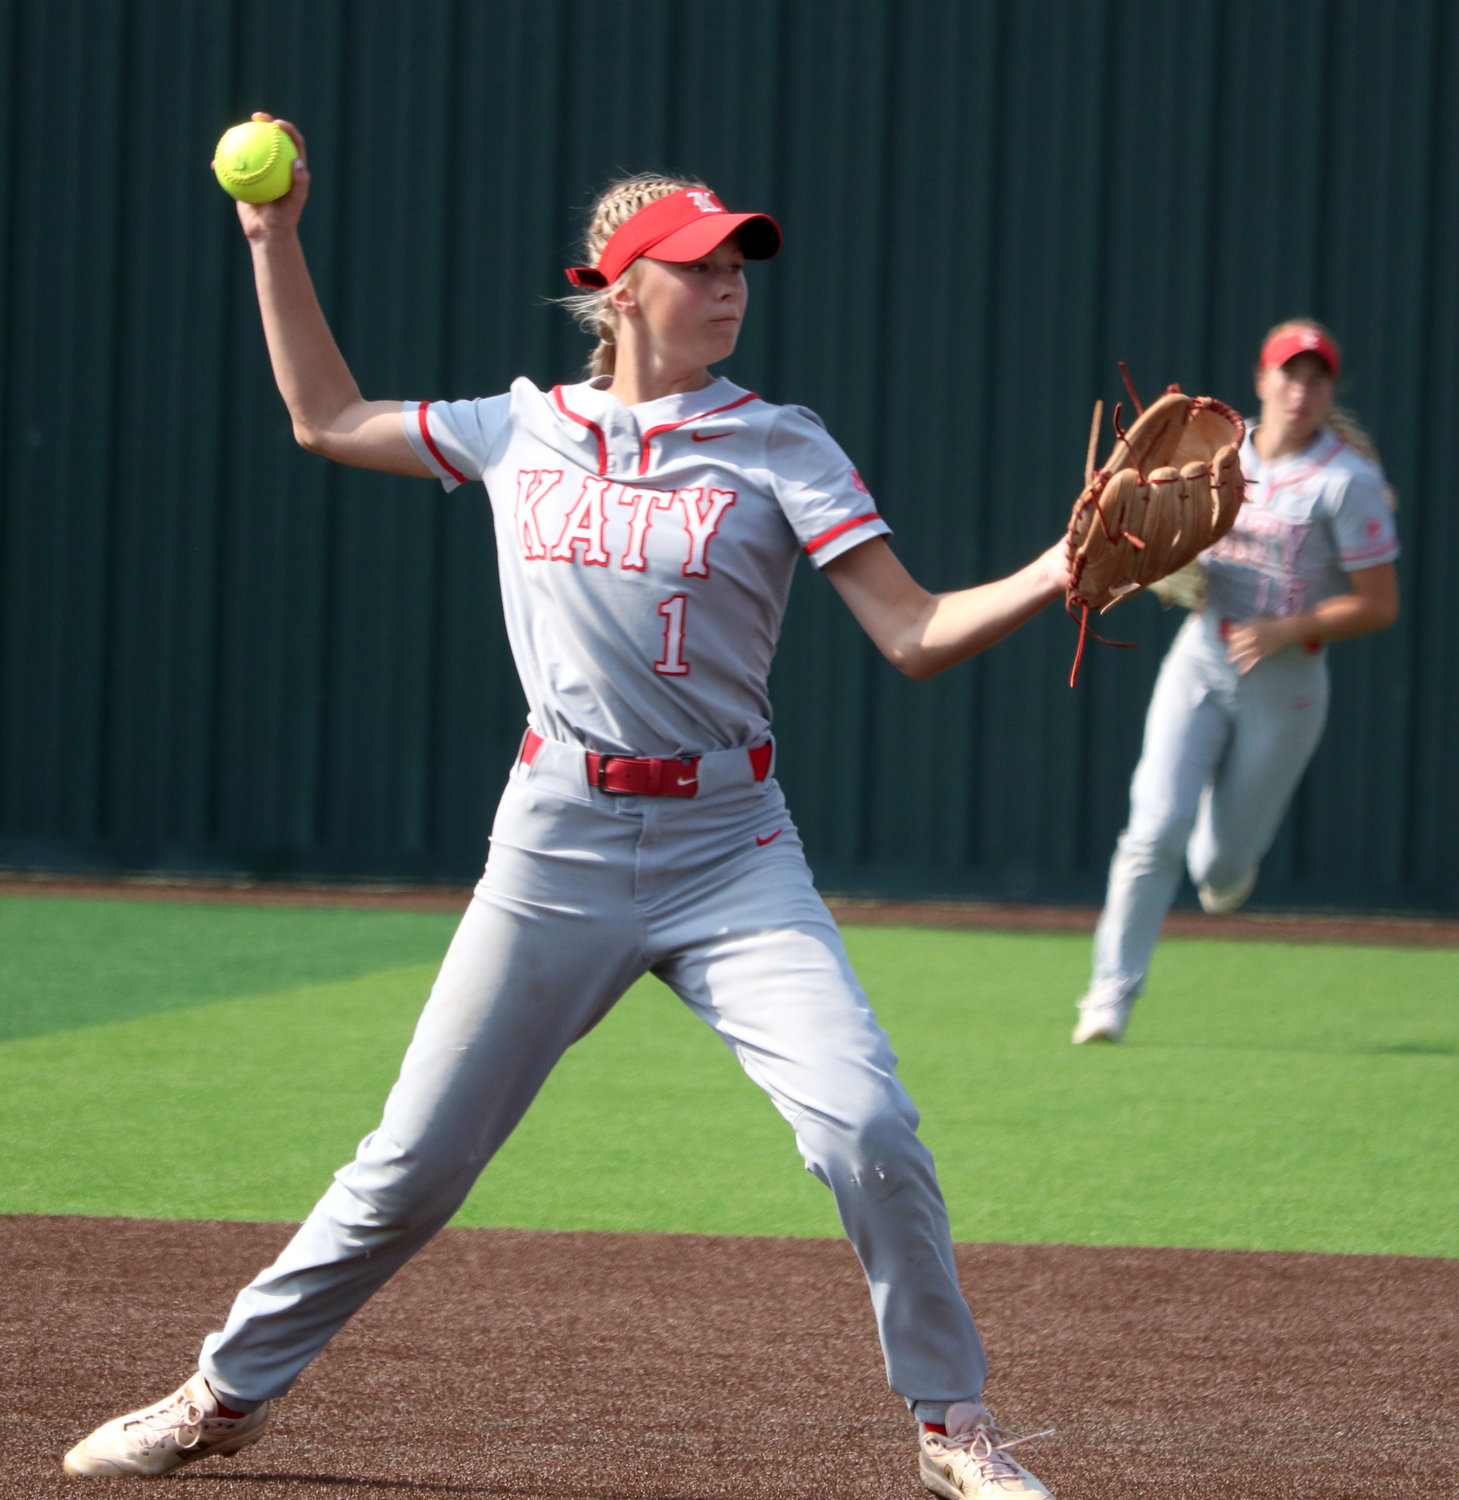 Peyton Watson throws to first base during Saturday’s area round game between Katy and Cy-Fair at Cy-Lakes.